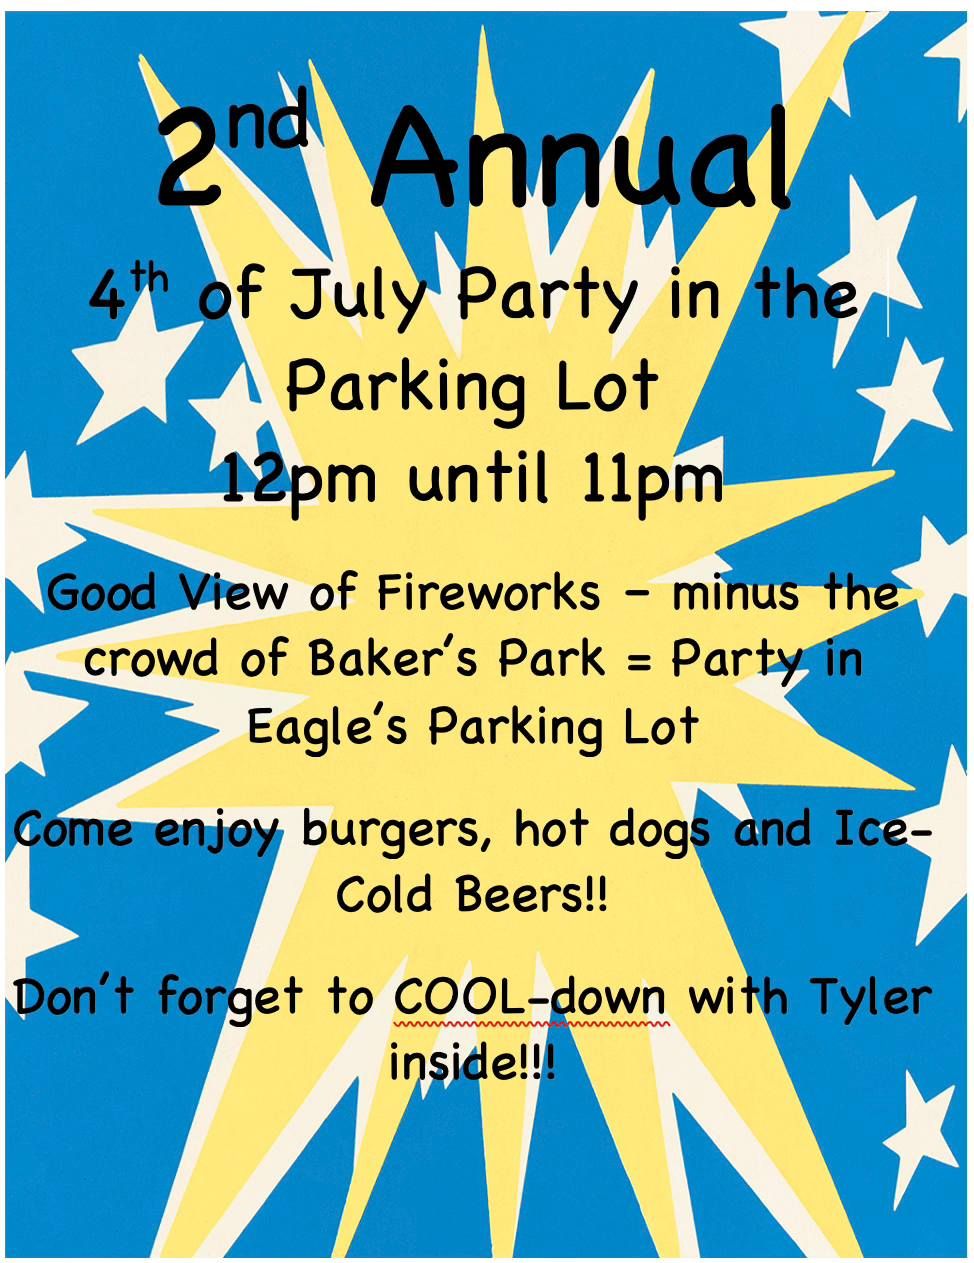 2nd Annual 4th of July Party in Parking Lot